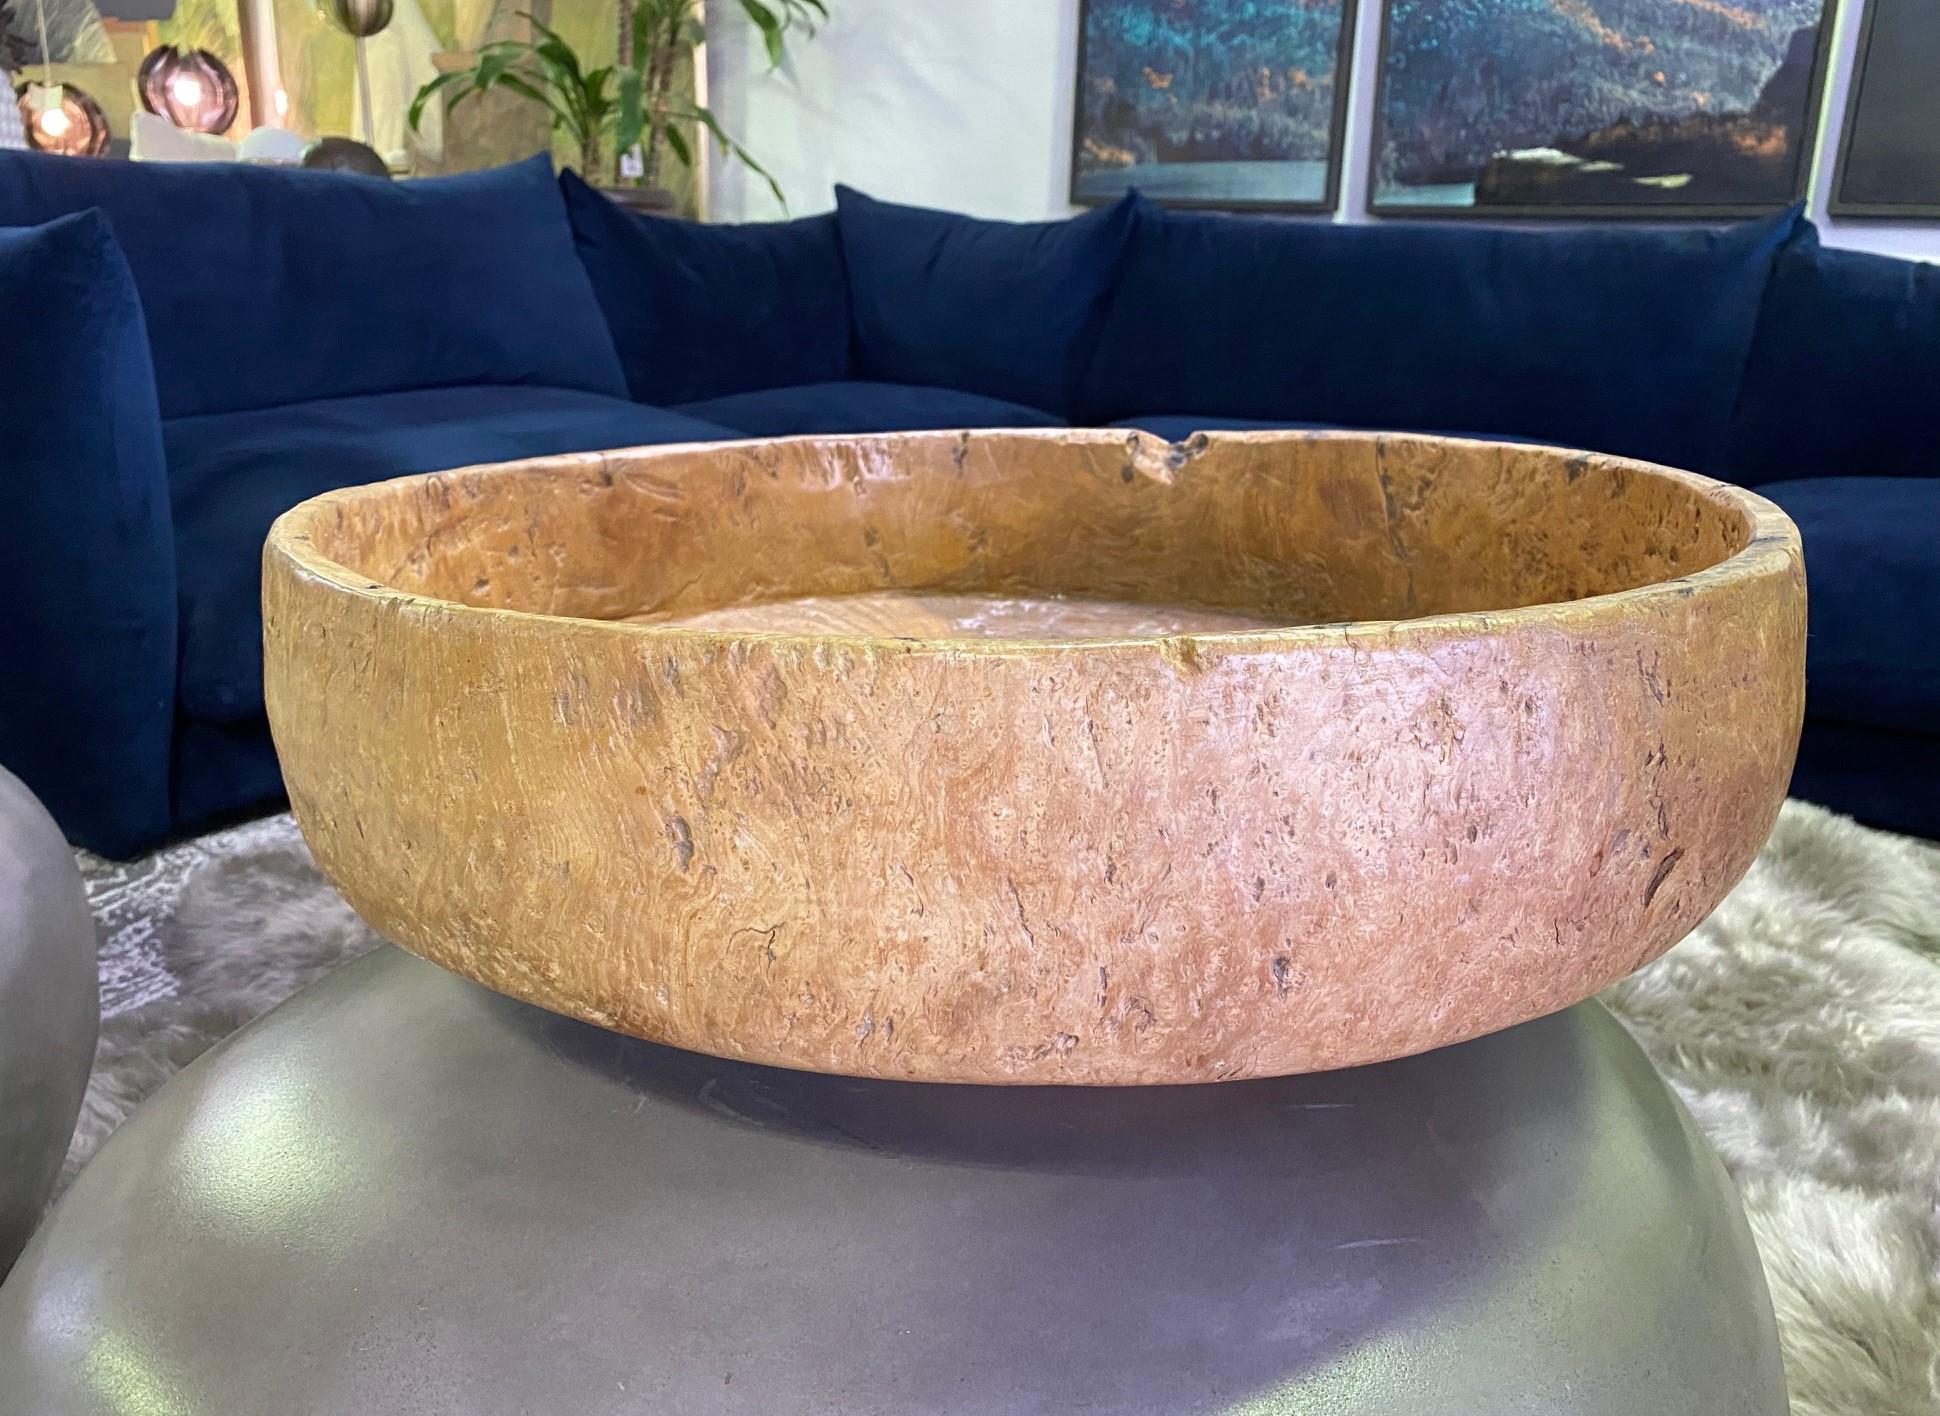 Hand-Carved Large Heavy Monumental Massive Rustic Wood Carved Centerpiece Bowl